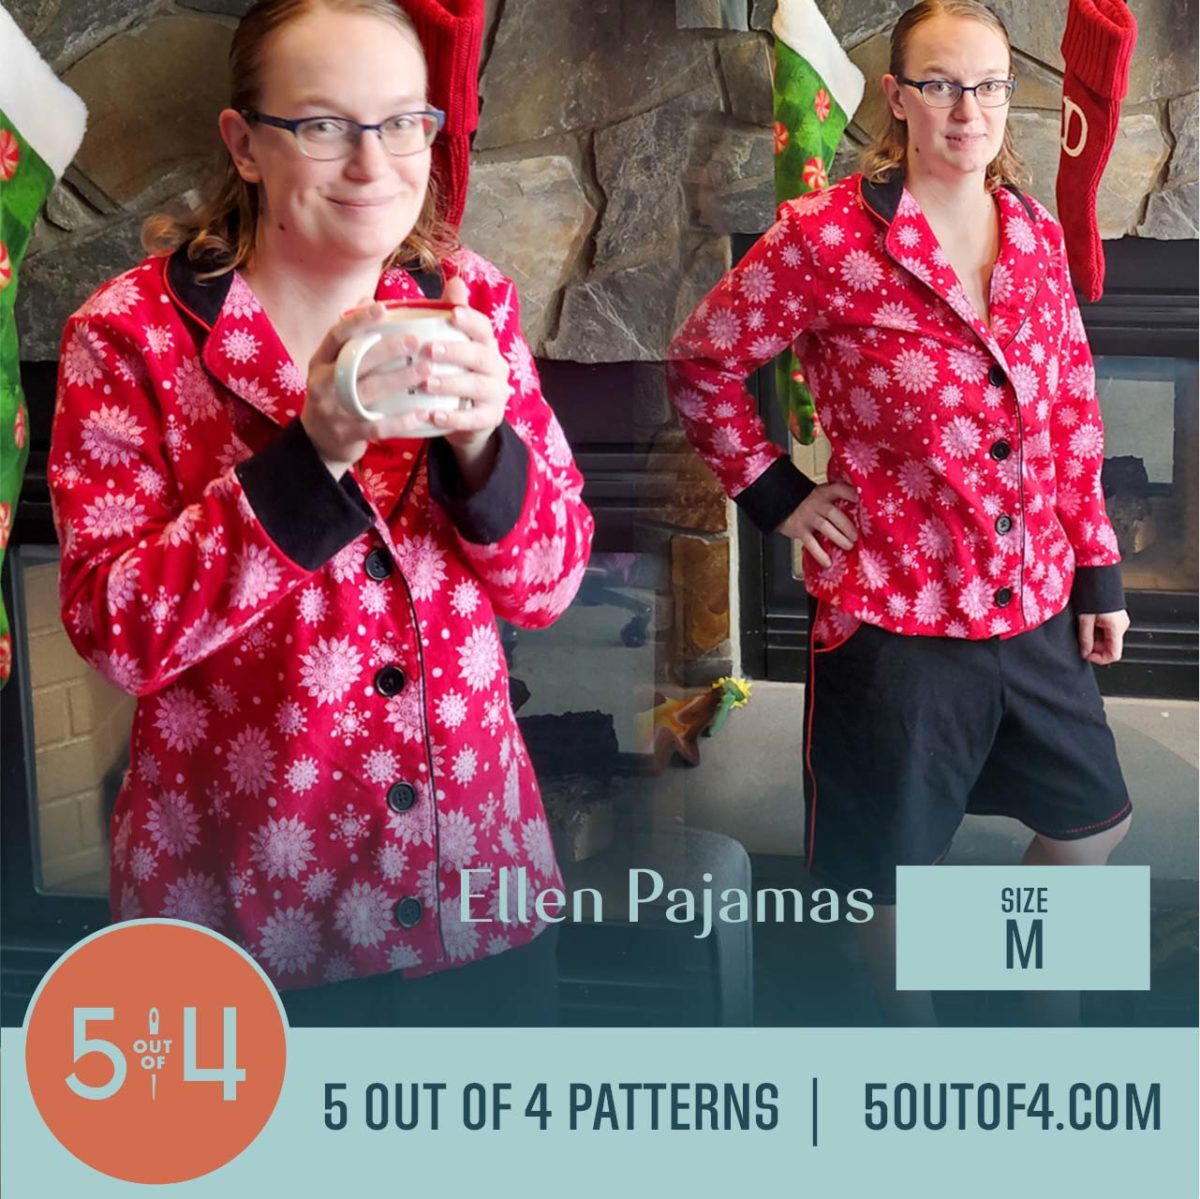 5oo4 Woven Pajama Pattern for Women size M